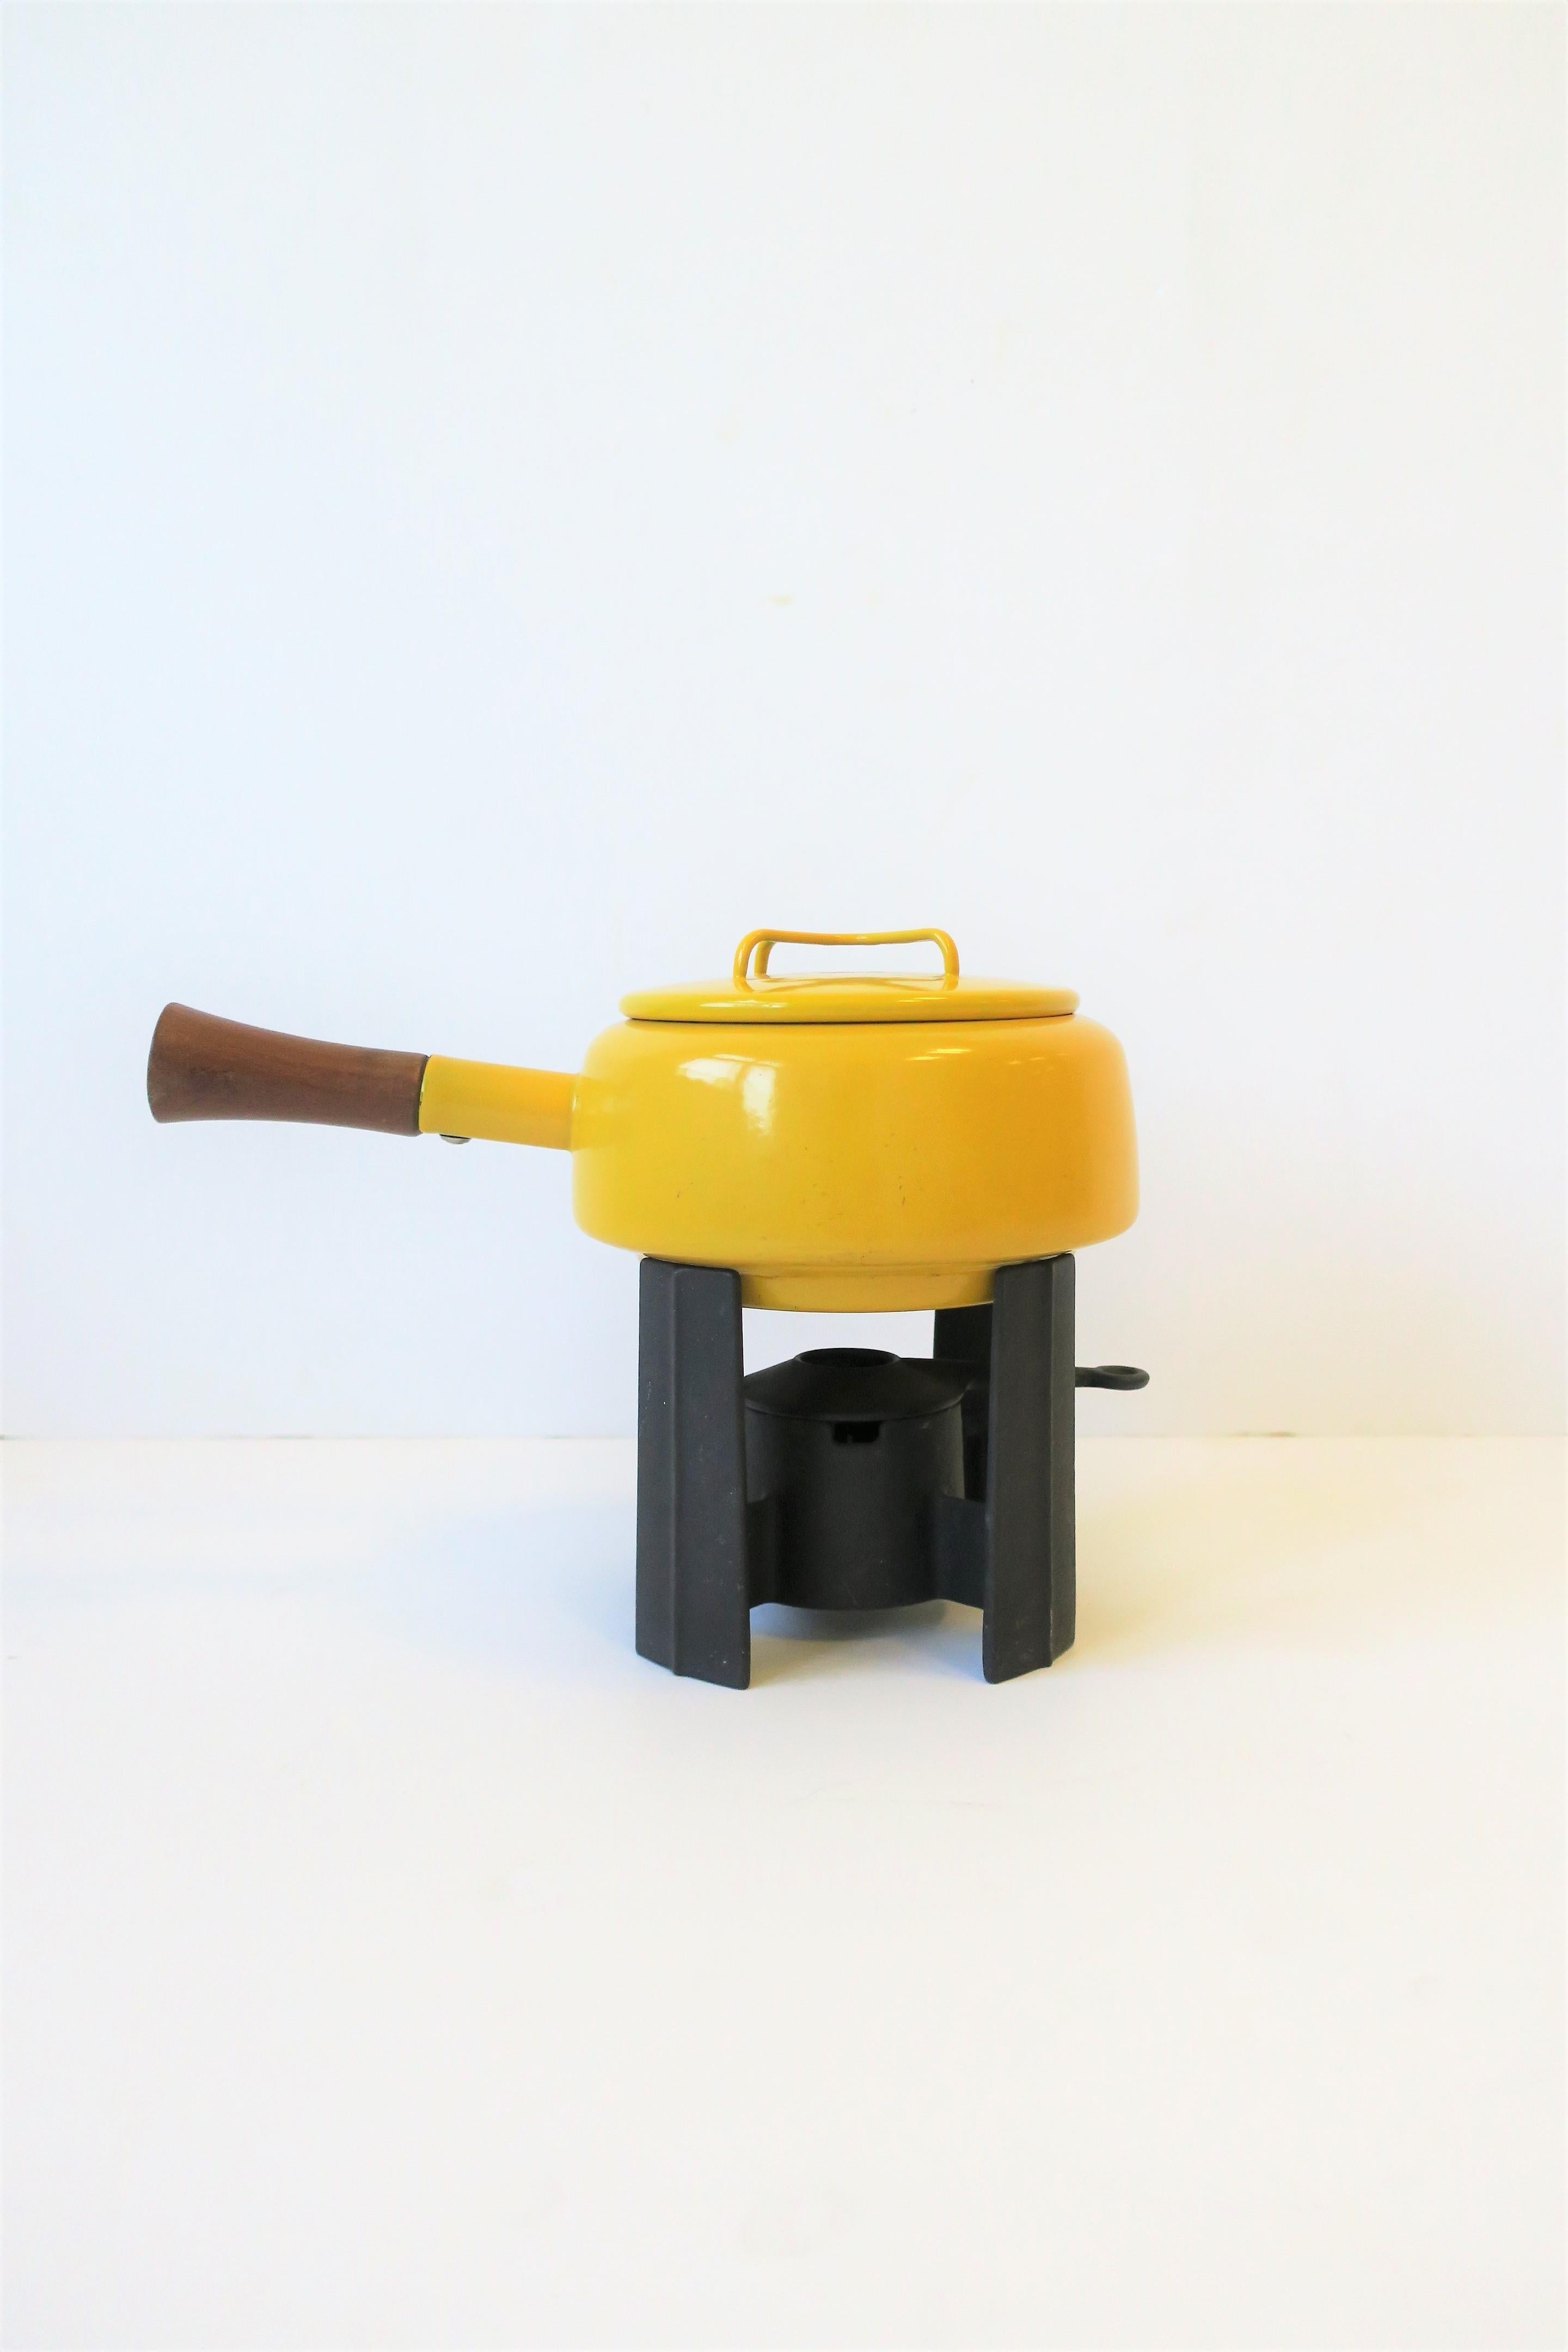 A vintage Mid-Century Modern Dansk yellow enamel fondue pot with brown wood handle and black burner, circa mid-20th century, Europe. Pot is made in France as marked, and black burner is made in Finland, as marked. (Please note, this is a correct and